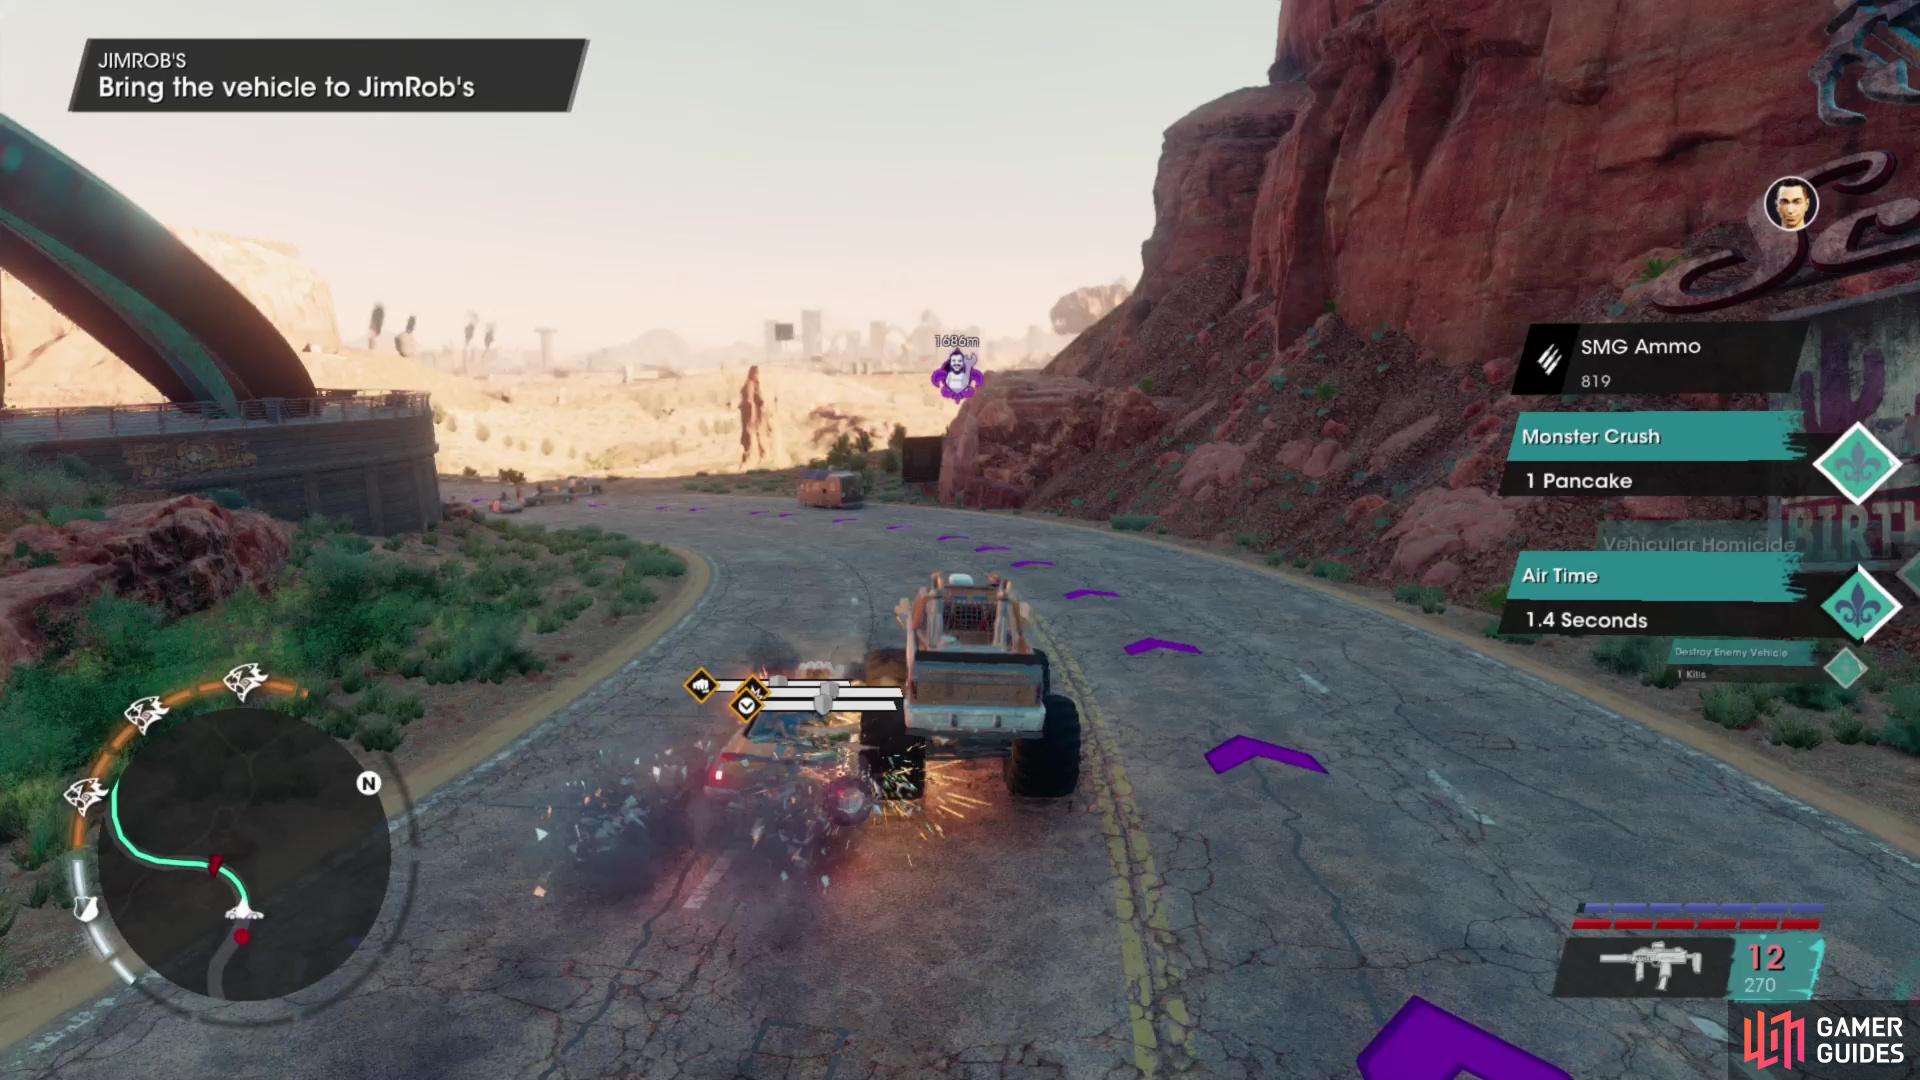 Enemy vehicles who get too close will end up flattened.